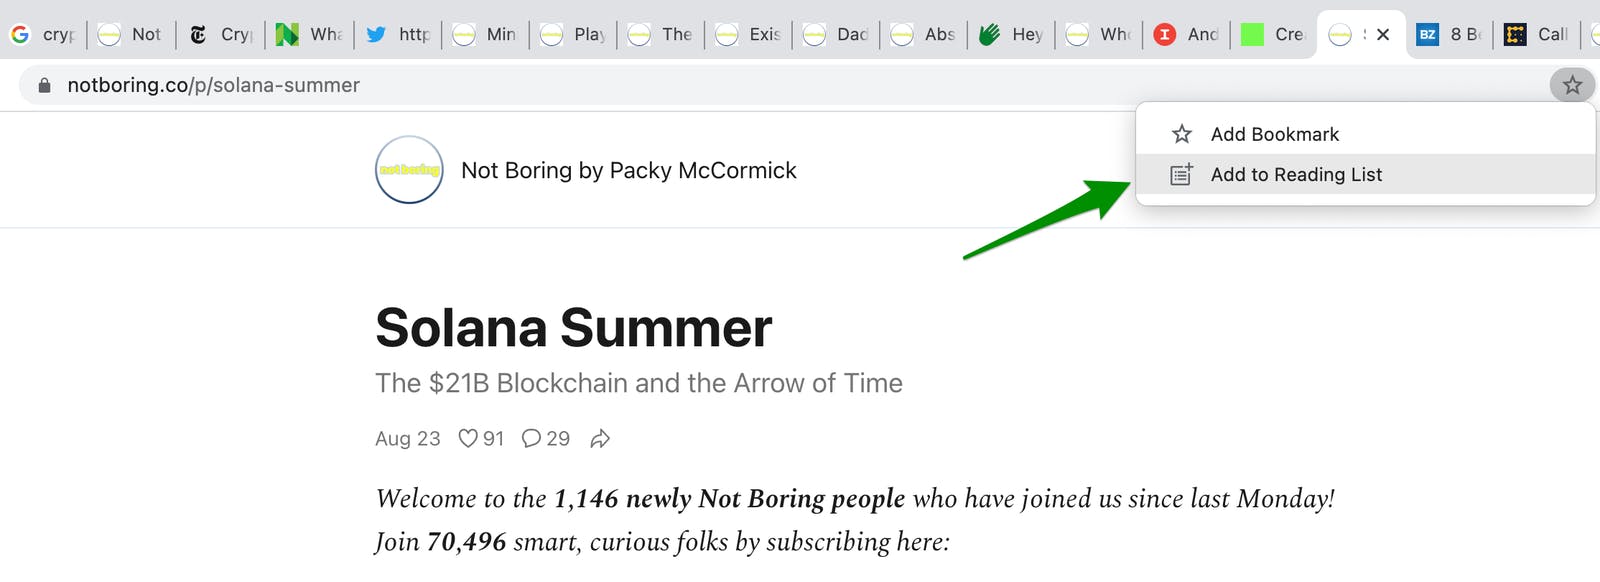 Browser window with multiple tabs, green arrowing pointing to "add to reading list" button